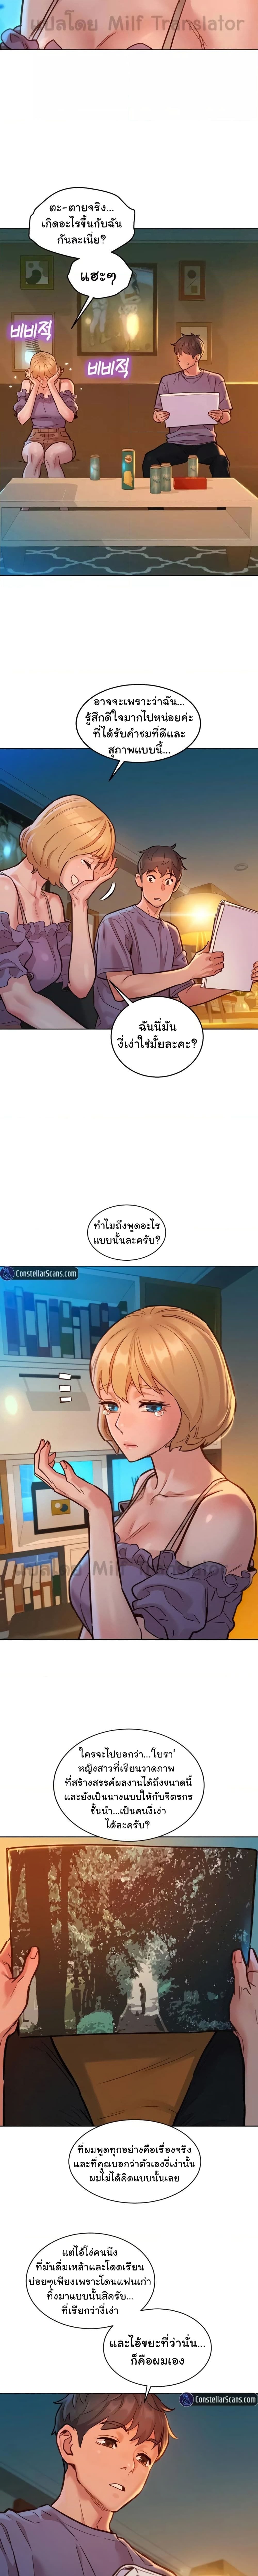 Let’s Hang Out from Today ตอนที่ 19 ภาพ 4